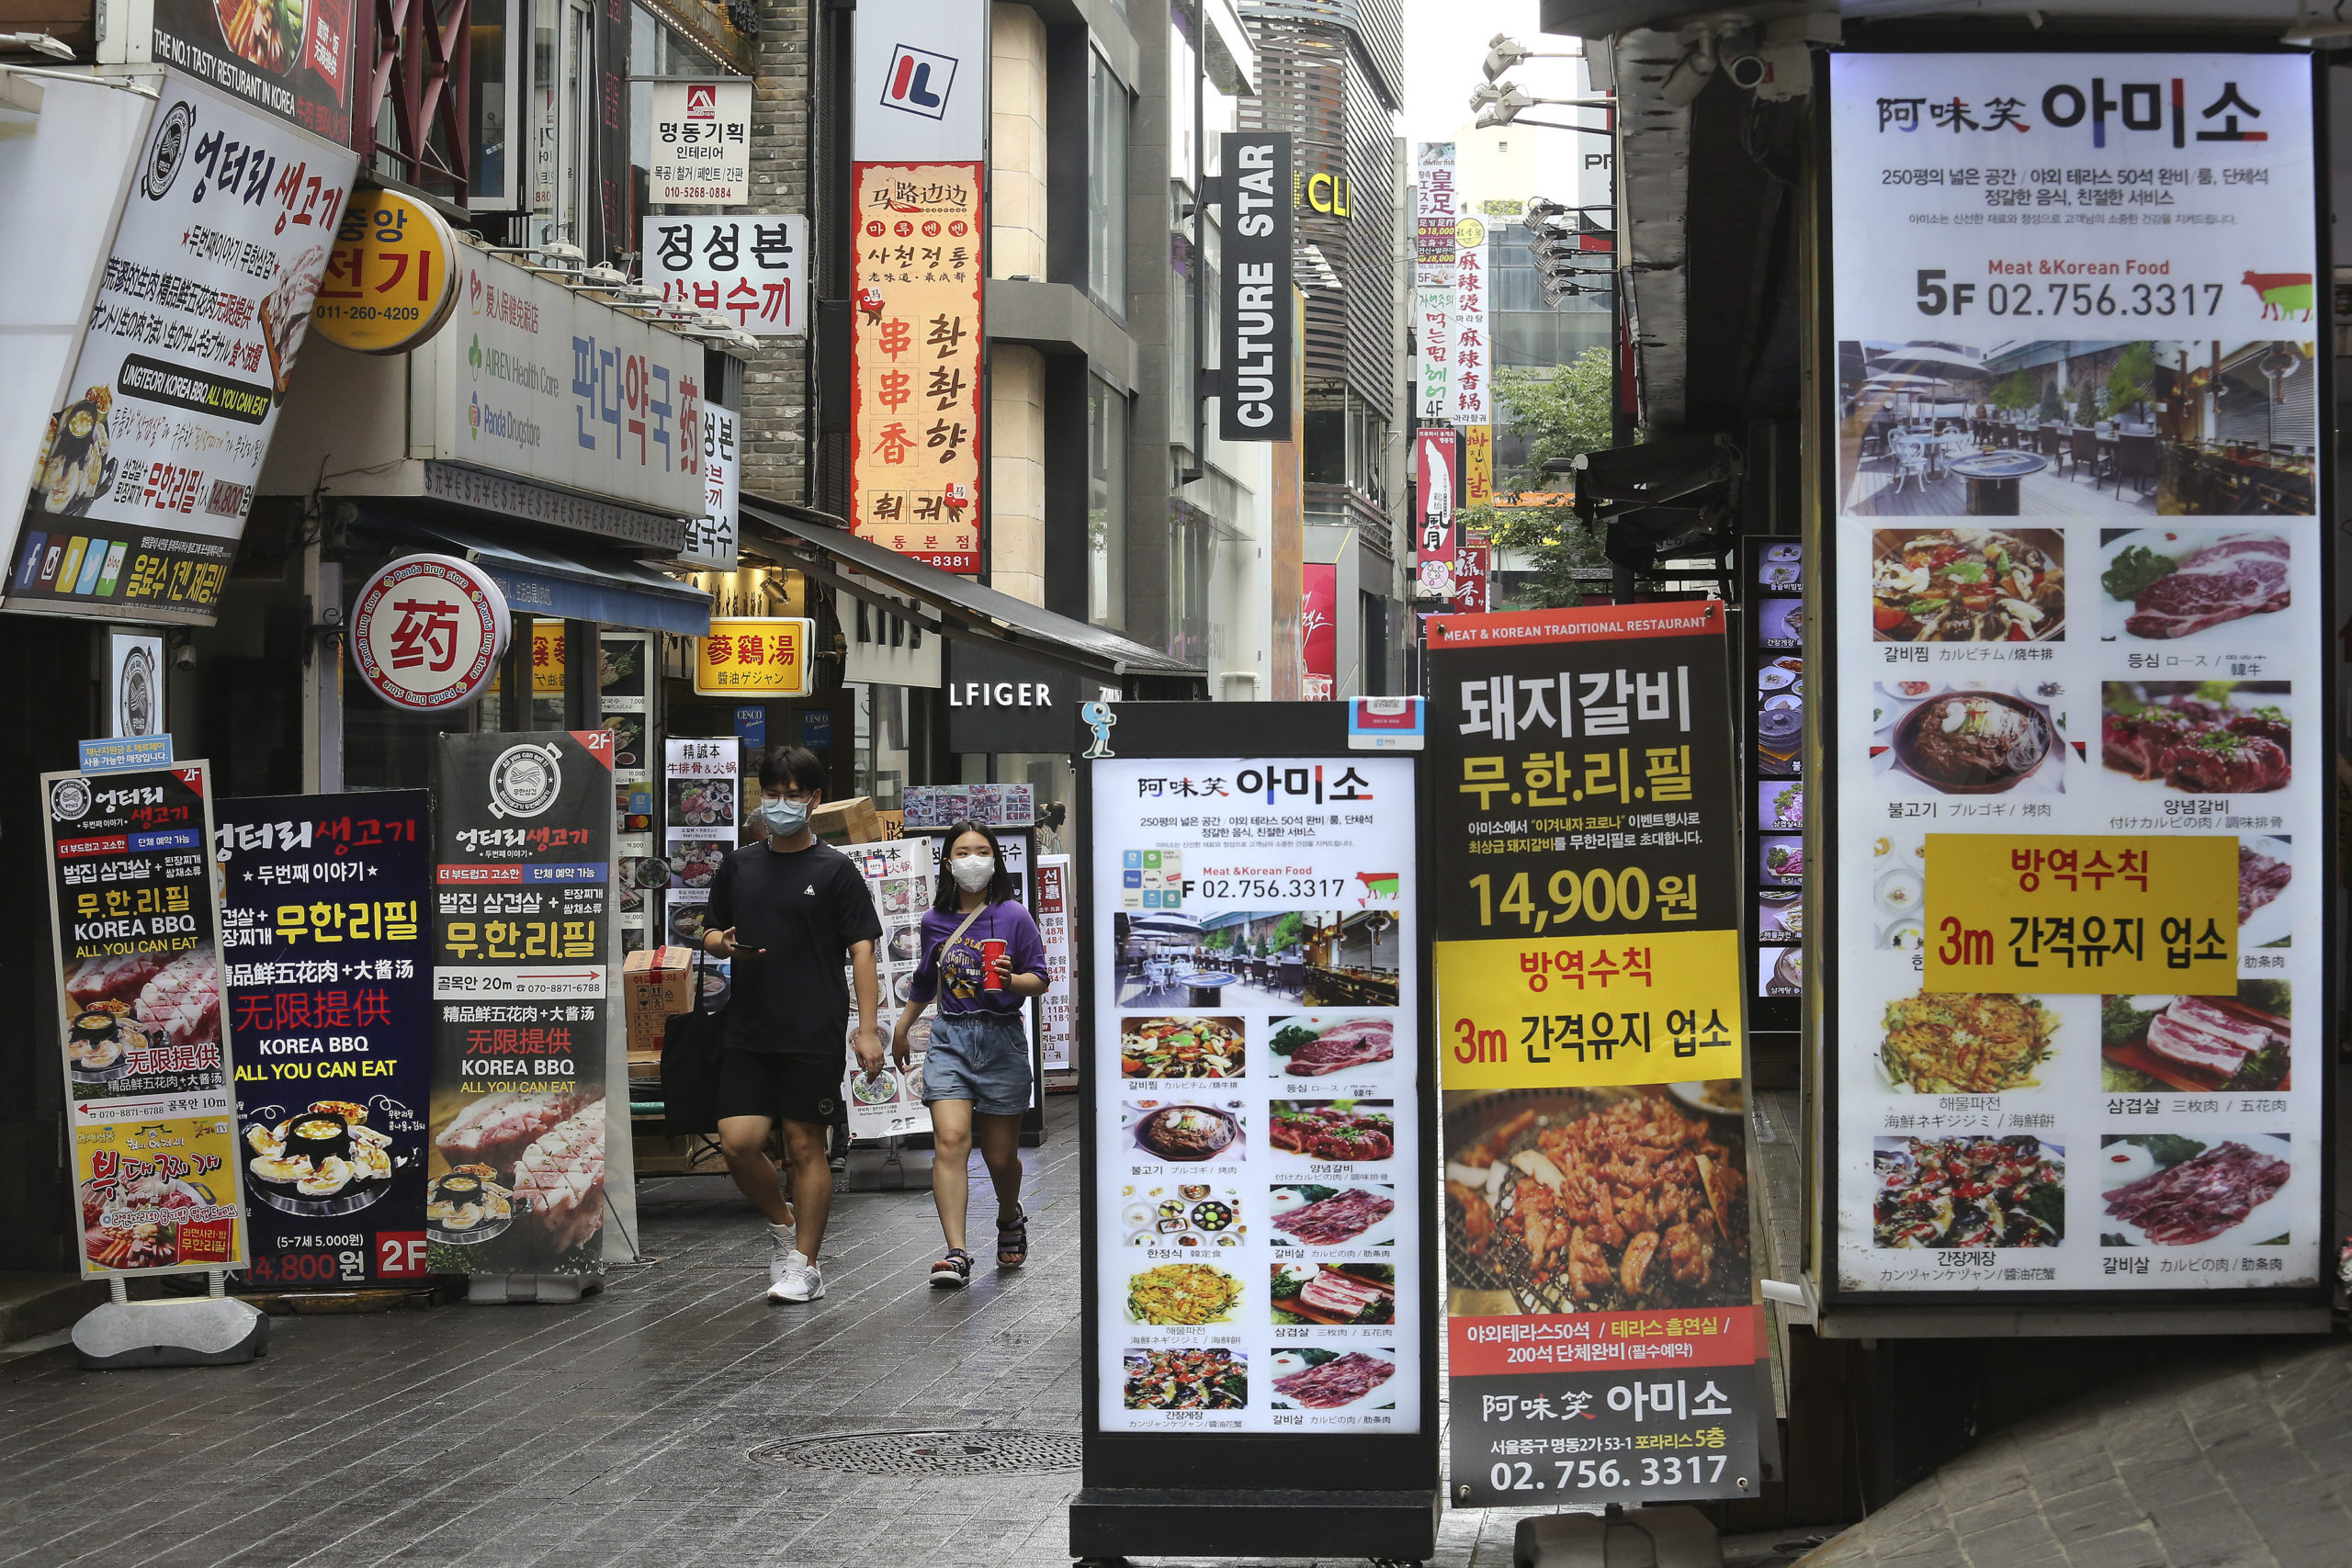 People wearing face masks to help protect against the spread of the coronavirus pass by banners showing the menu items of restaurants in Seoul, South Korea, Friday, Aug. 28, 2020. South Korean officials are considering reducing working hours of restaurants and cafes as the country counted its 15th straight day of triple-digit jumps in coronavirus infections. (AP Photo/Ahn Young-joon)